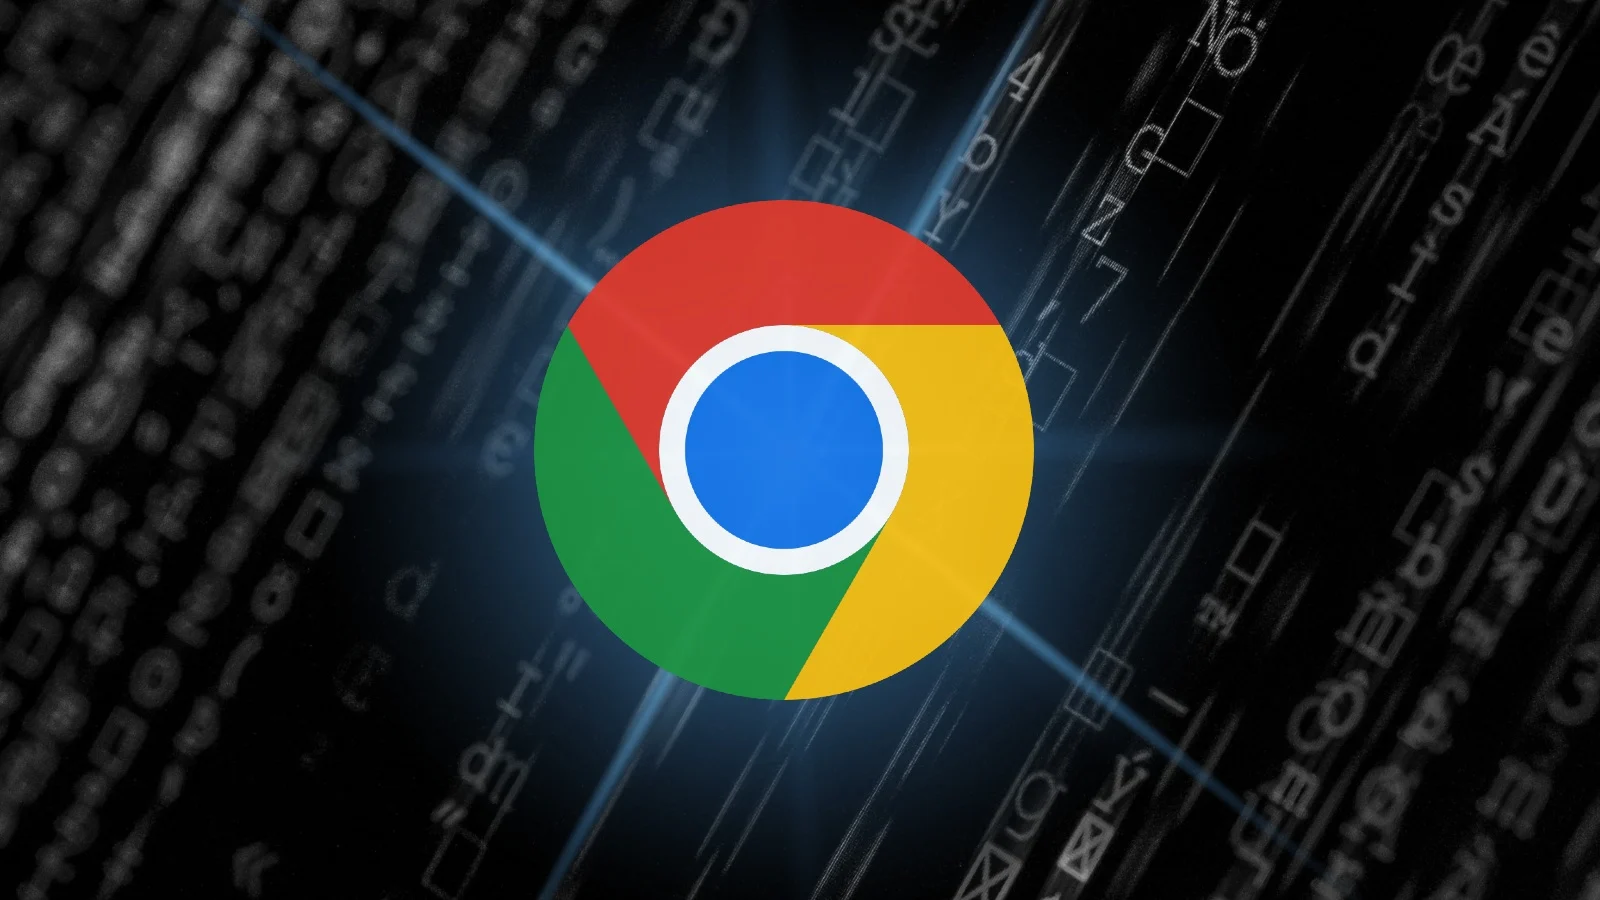 The fresh “IP Protection” feature in Google Chrome will conceal the IP addresses of its users